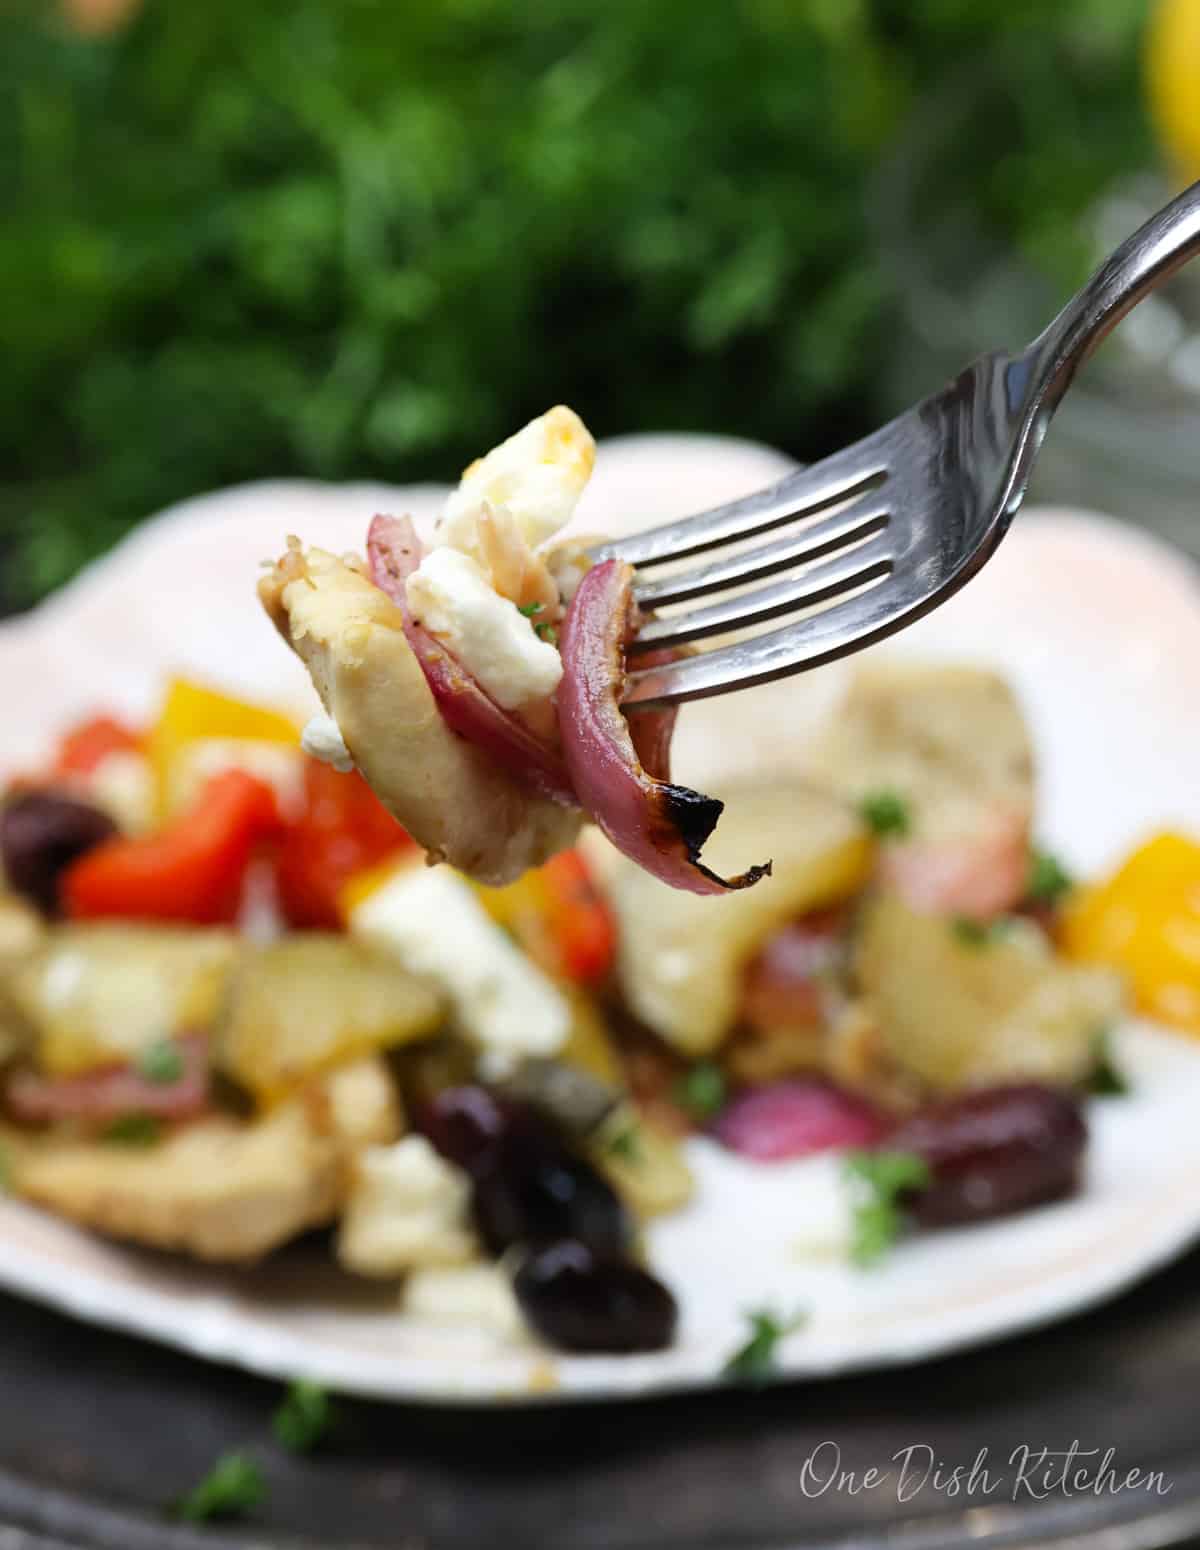 a fork filled with chicken and onions above a plate of vegetables.